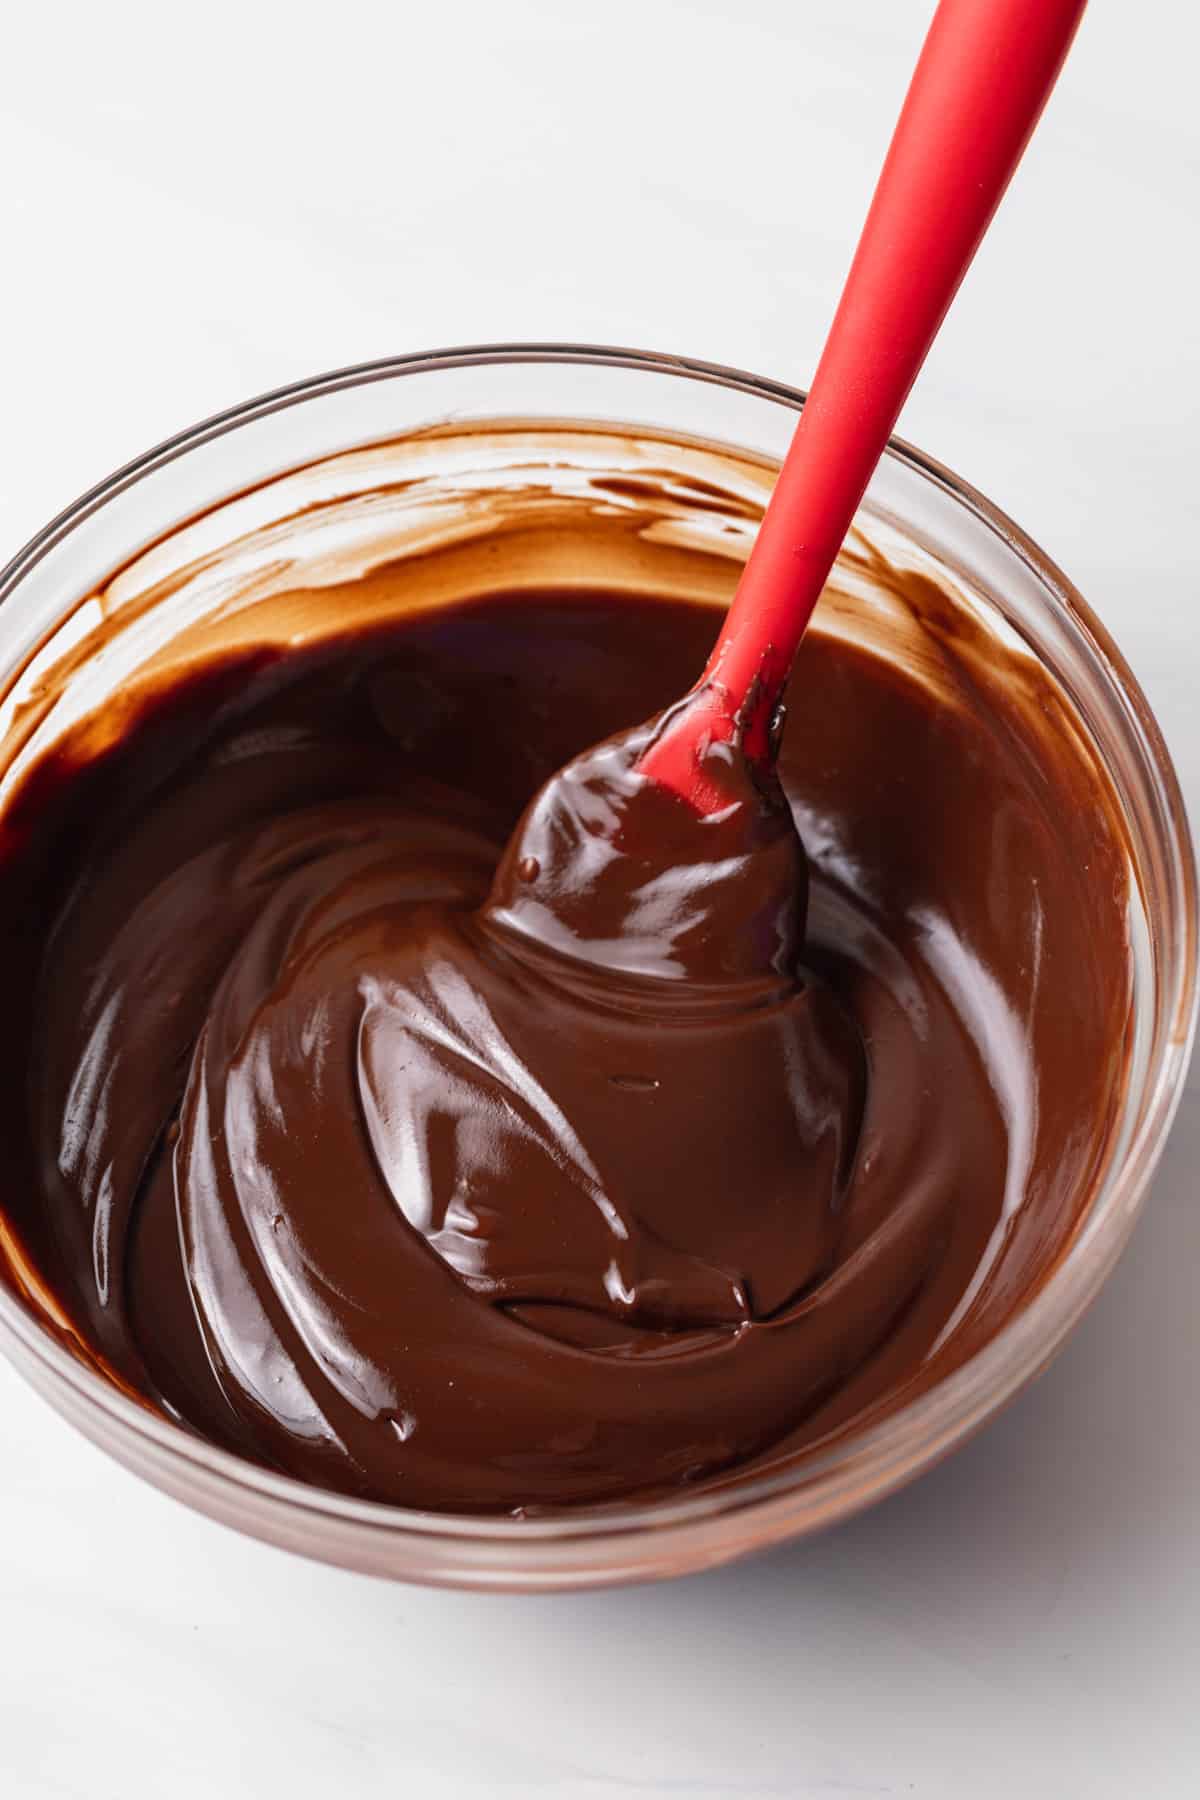 bowl of melted chocolate with red spatula